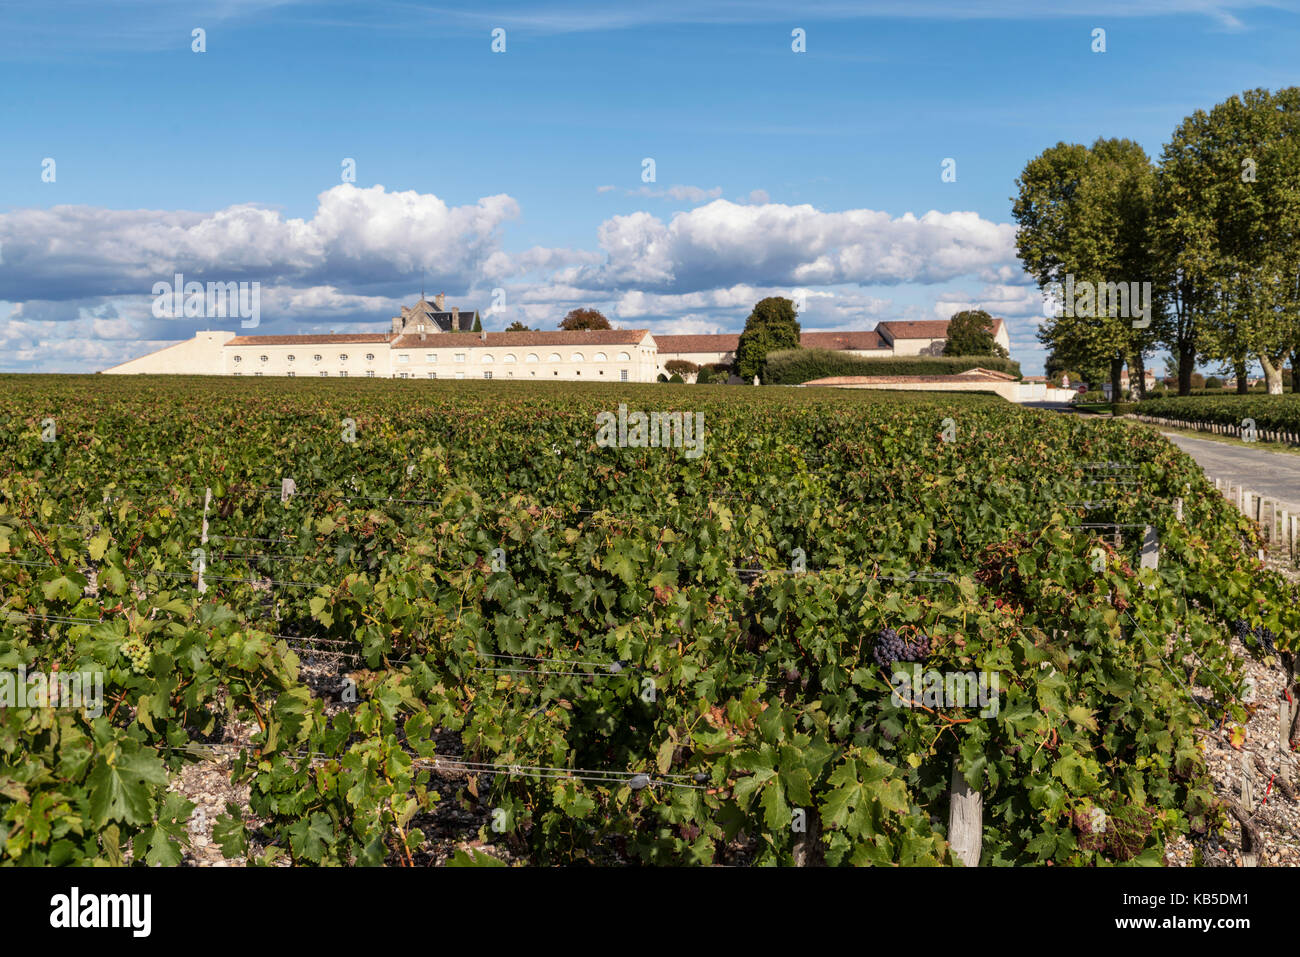 Chateau Mouton Rothschild , Weinberg in Medoc, Margeaux, Weinrebe, Bordeaux, Gironde, Aquitaine, Frankreich, Europa, Stockfoto